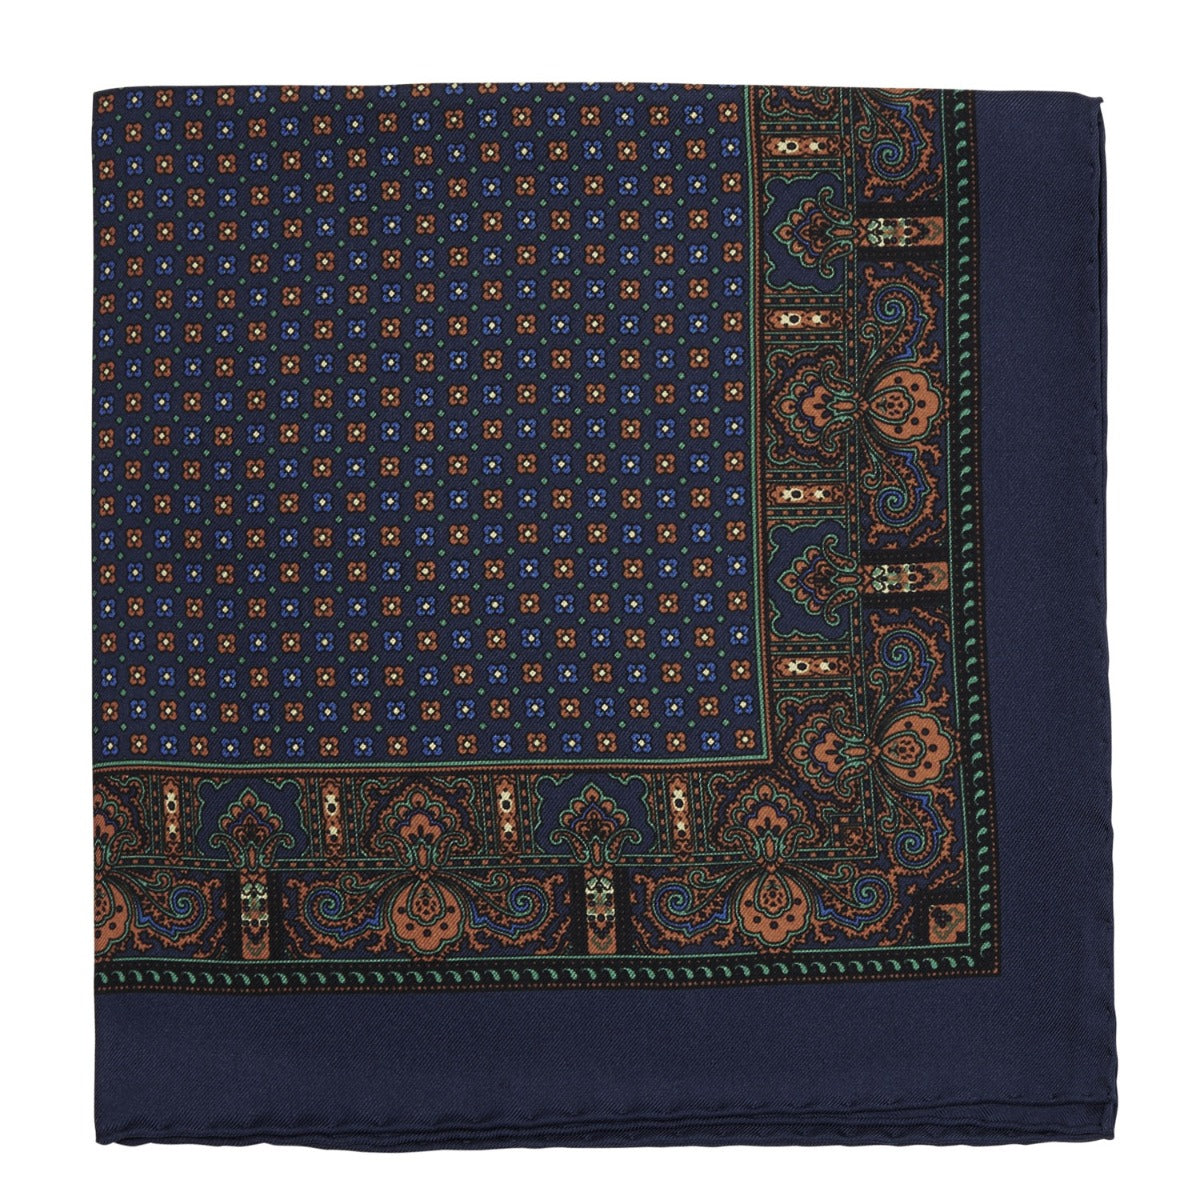 A Sovereign Grade 100% Silk Navy Repeating Floral Pocket Square from KirbyAllison.com with a paisley pattern and hand-rolled edges.